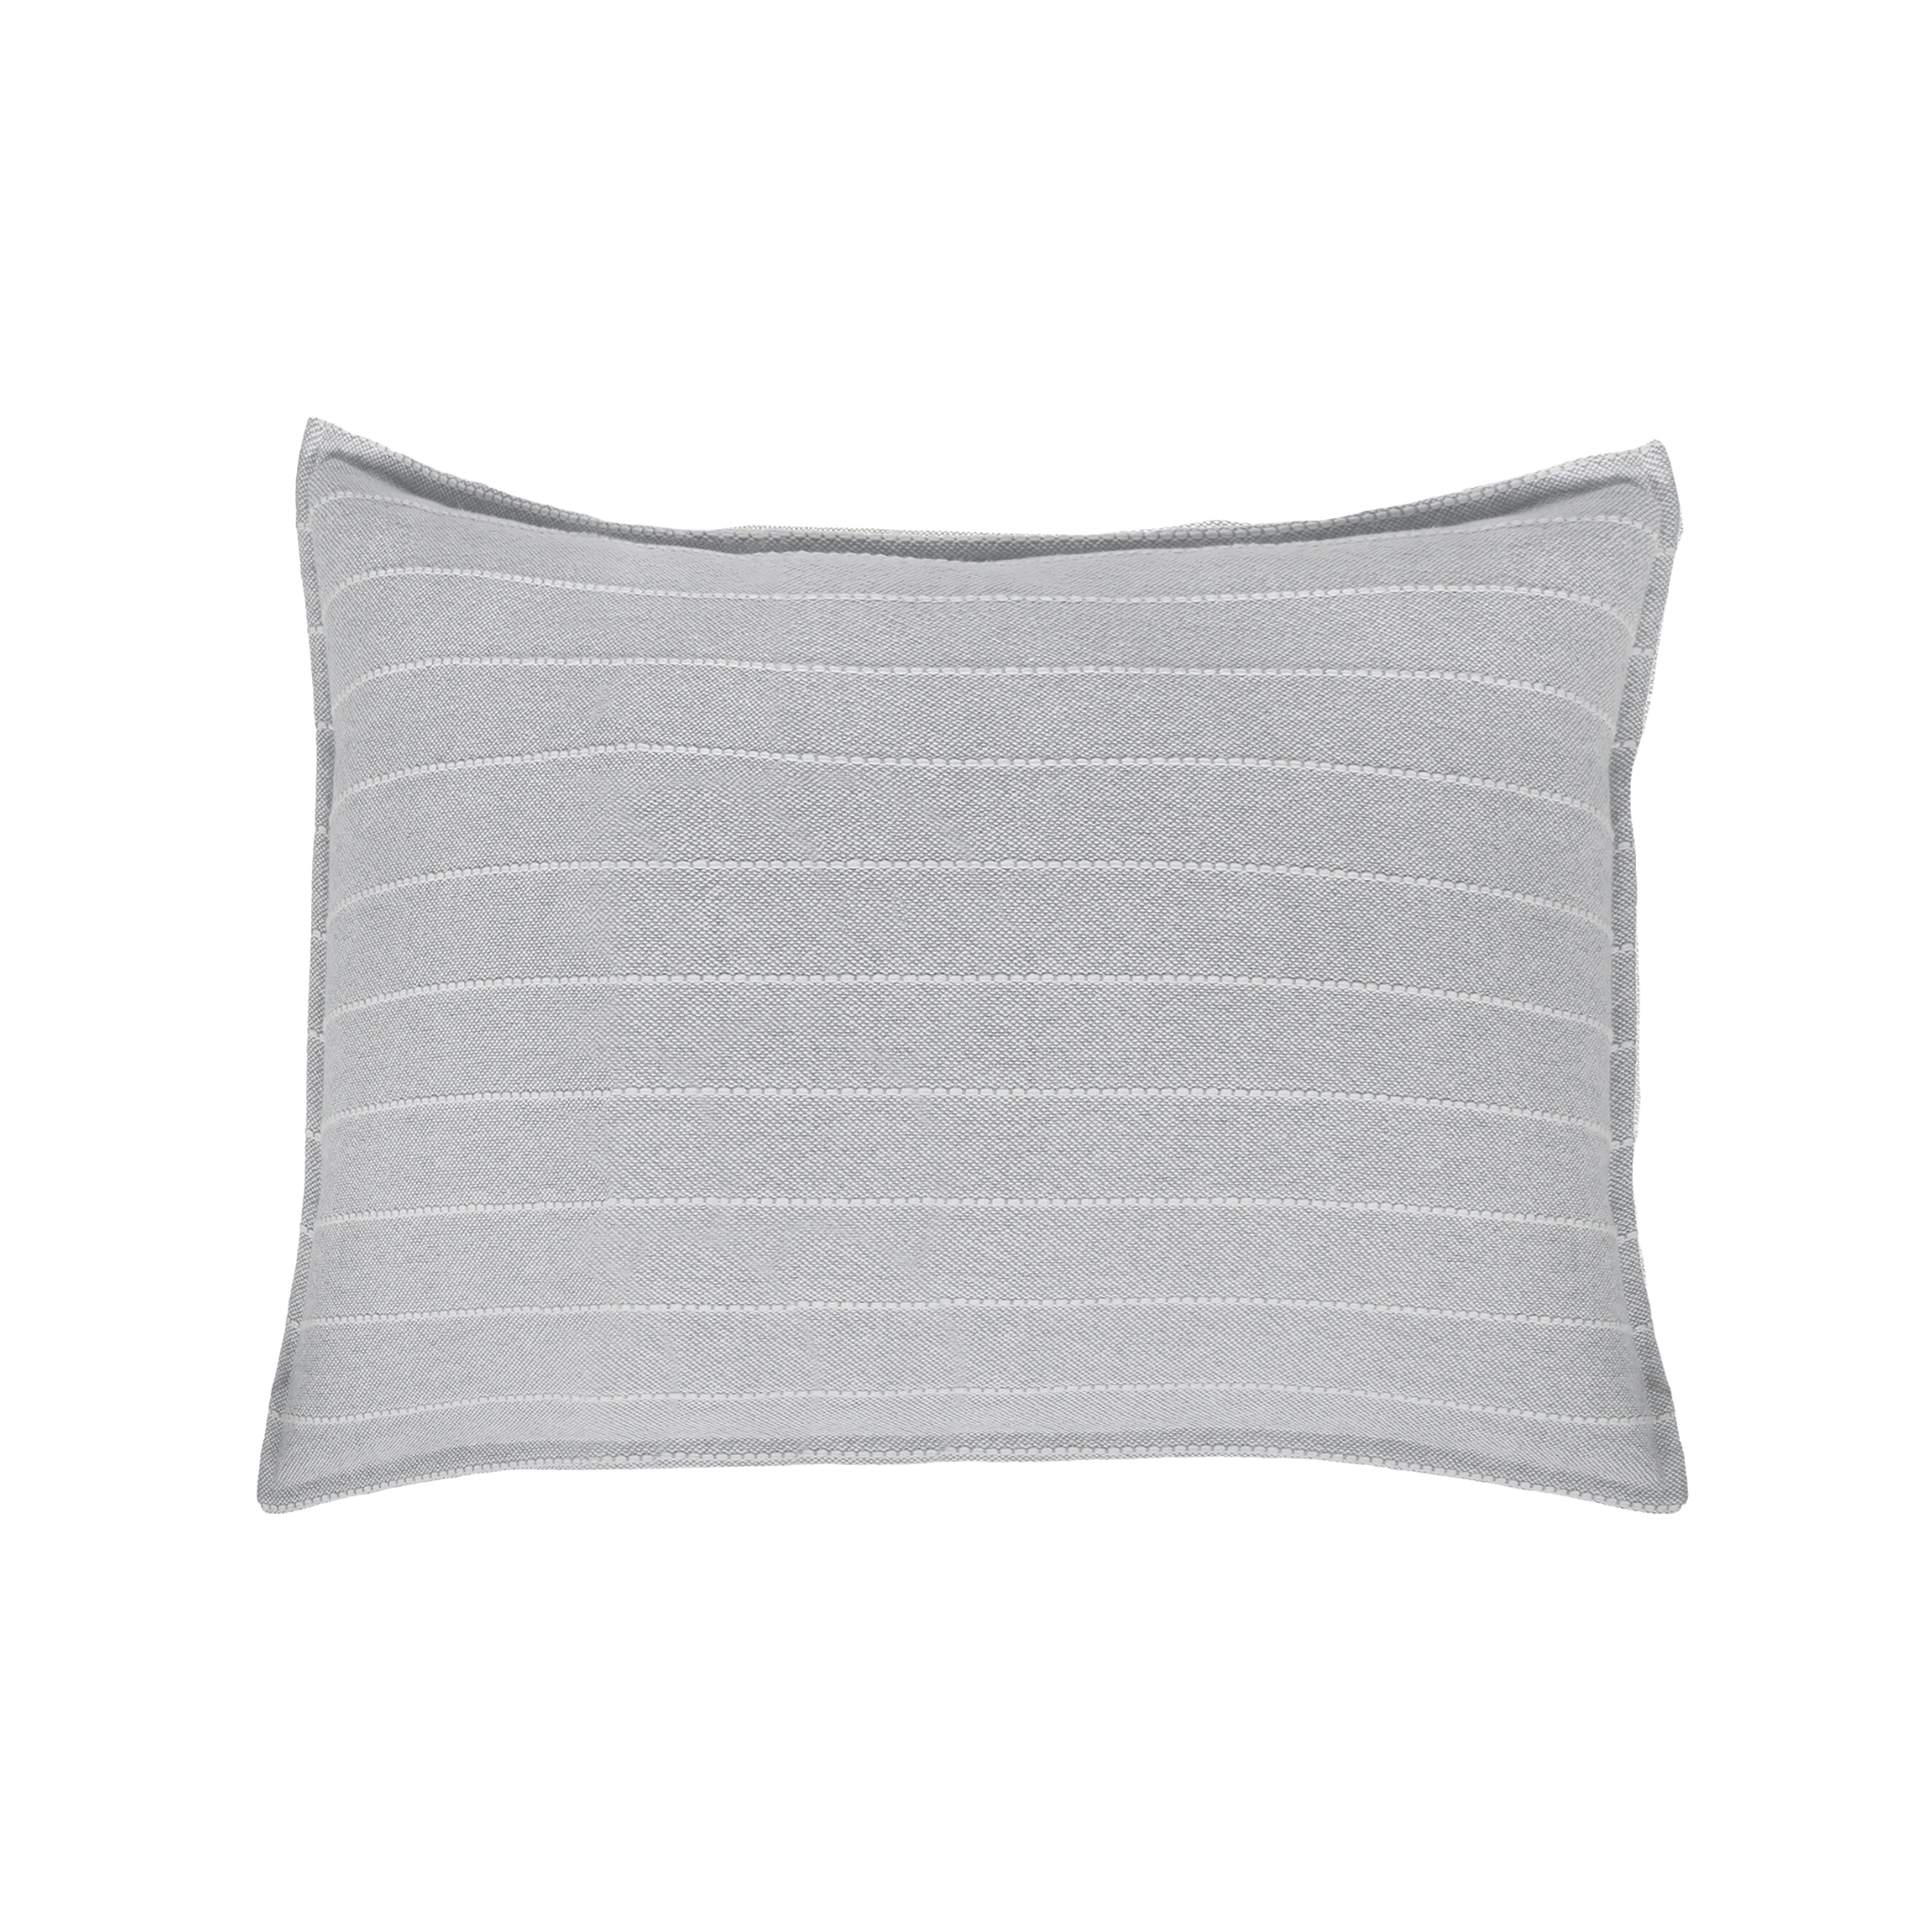 HENLEY BIG PILLOW 28&quot; X 36&quot; WITH INSERT - 2 COLORS-Pom Pom at Home